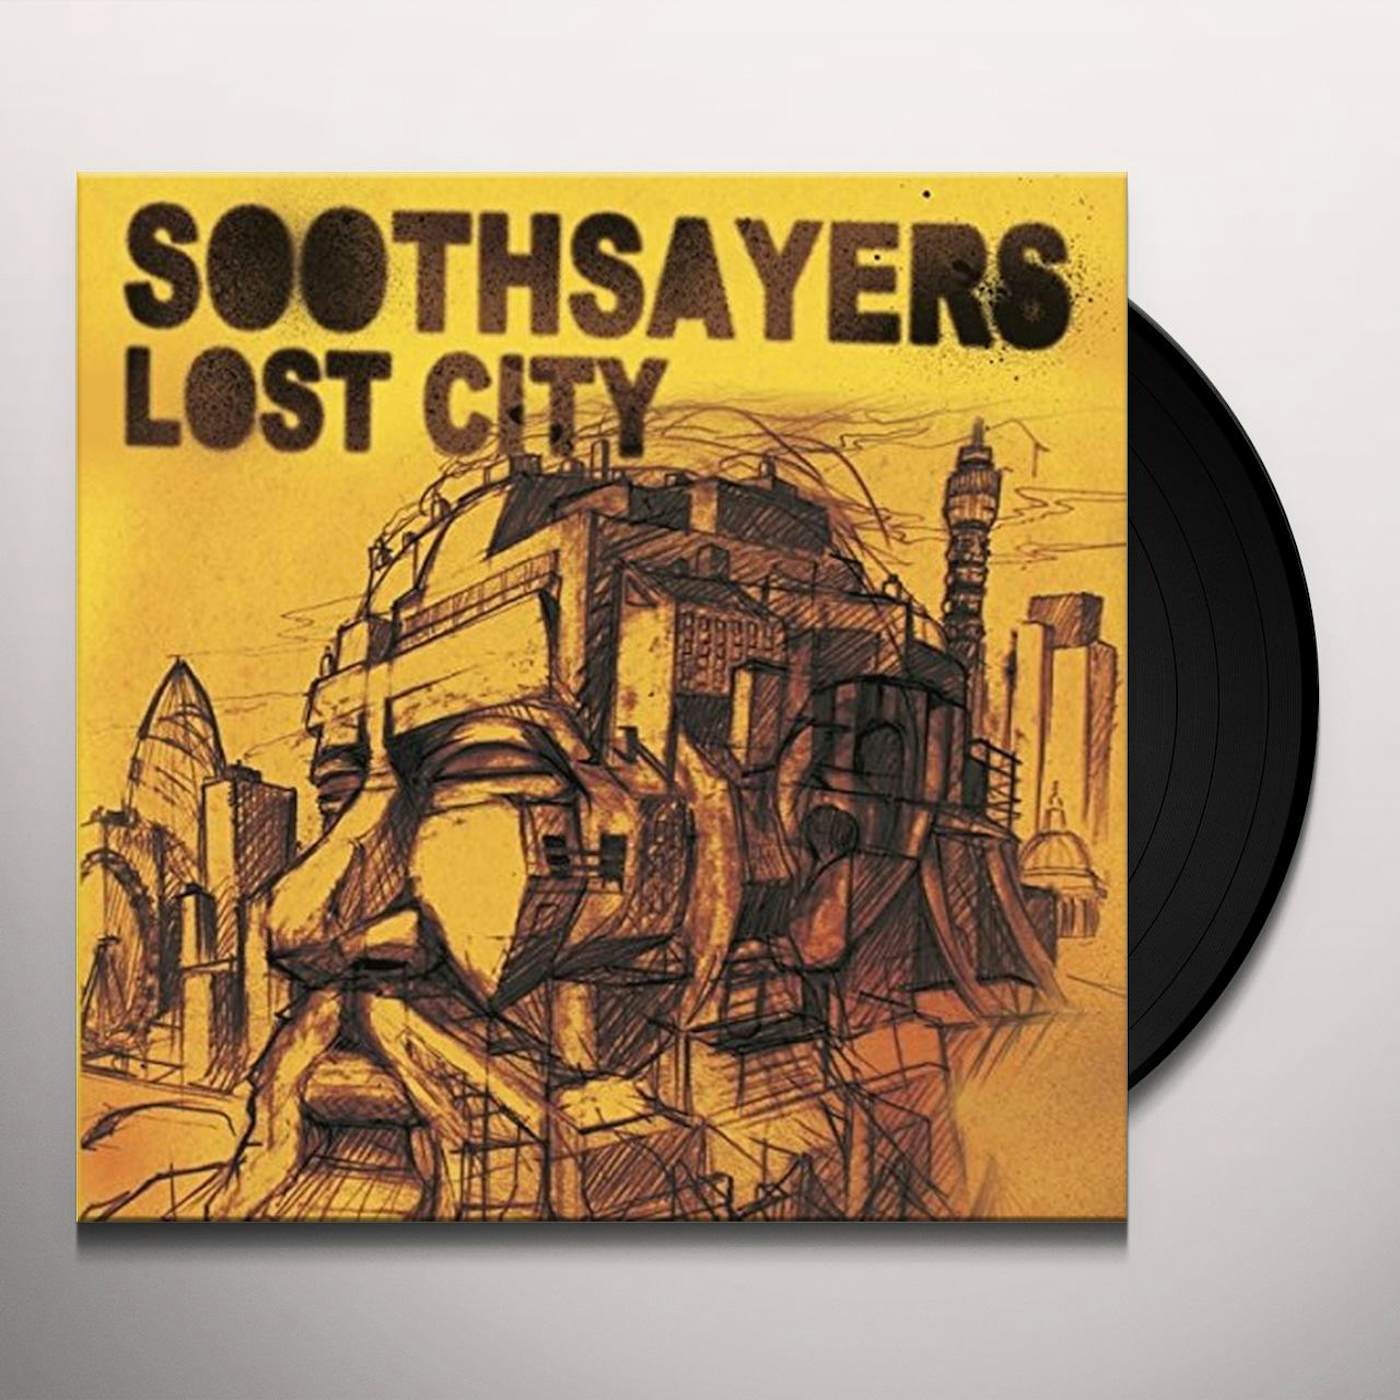 Soothsayers Lost City Vinyl Record